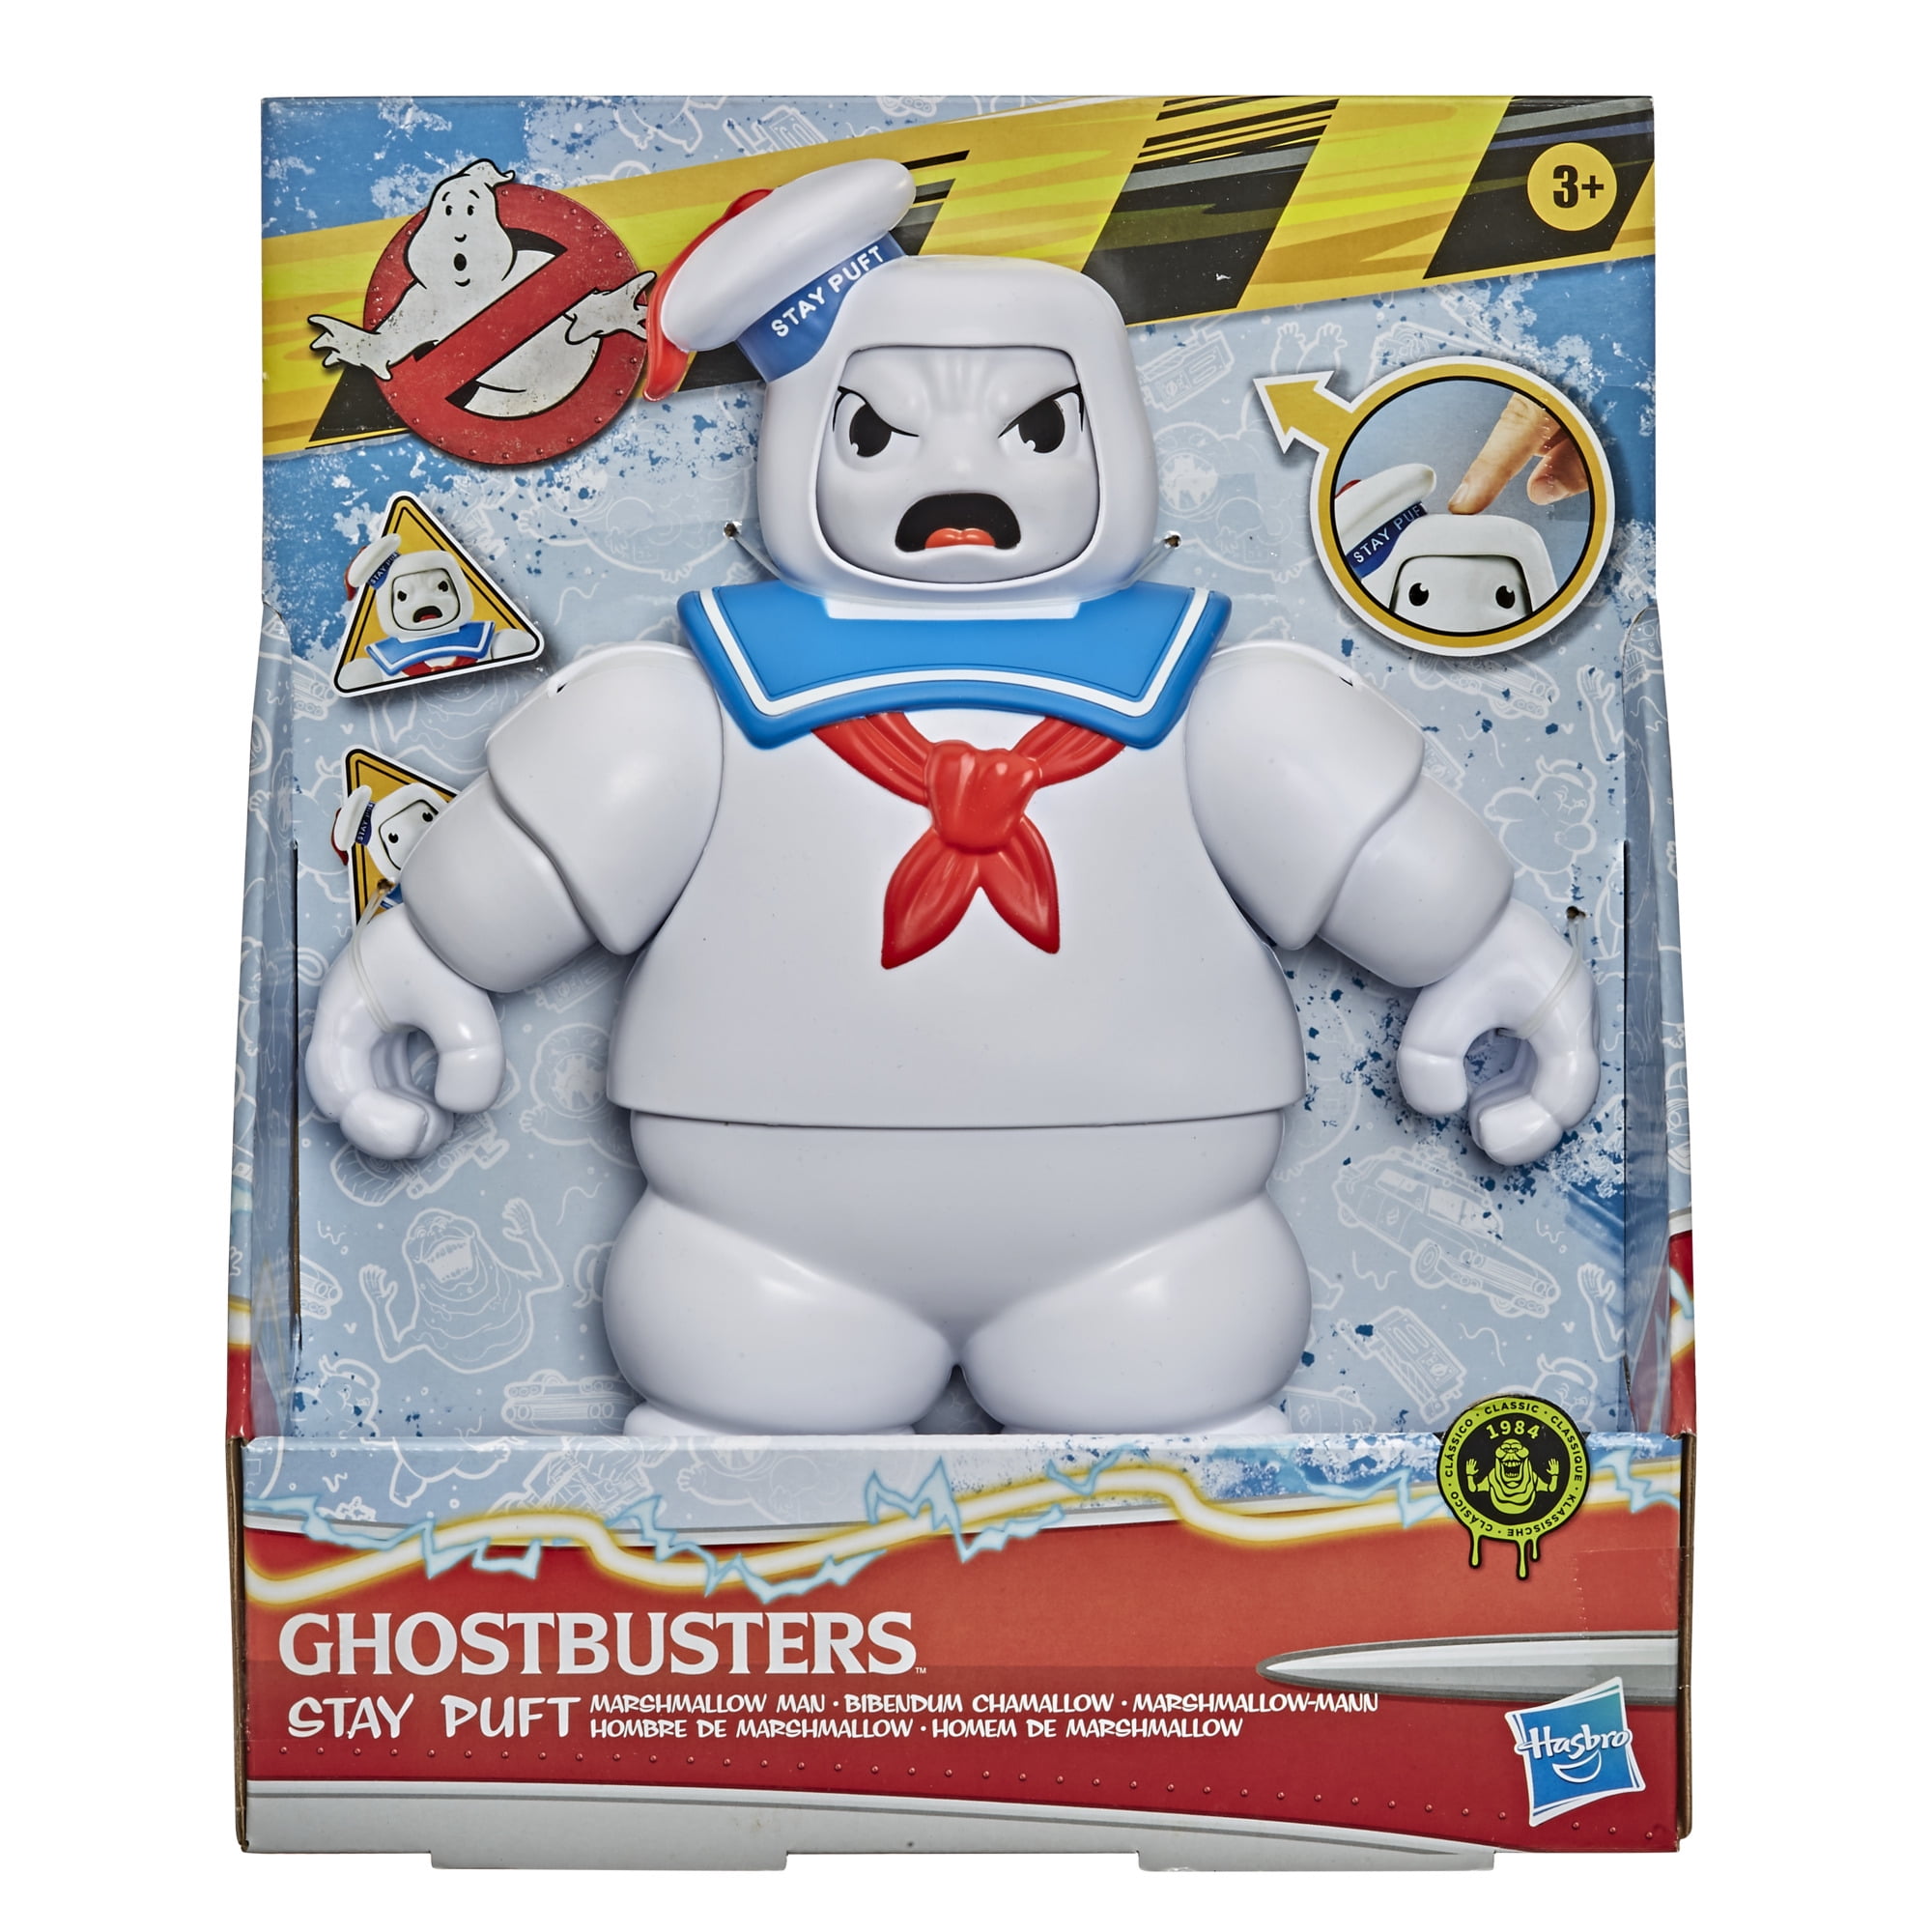 Ghostbusters Stay Puft Marshmallow Man Fright Ghost 5" Hasbro Action Figure 